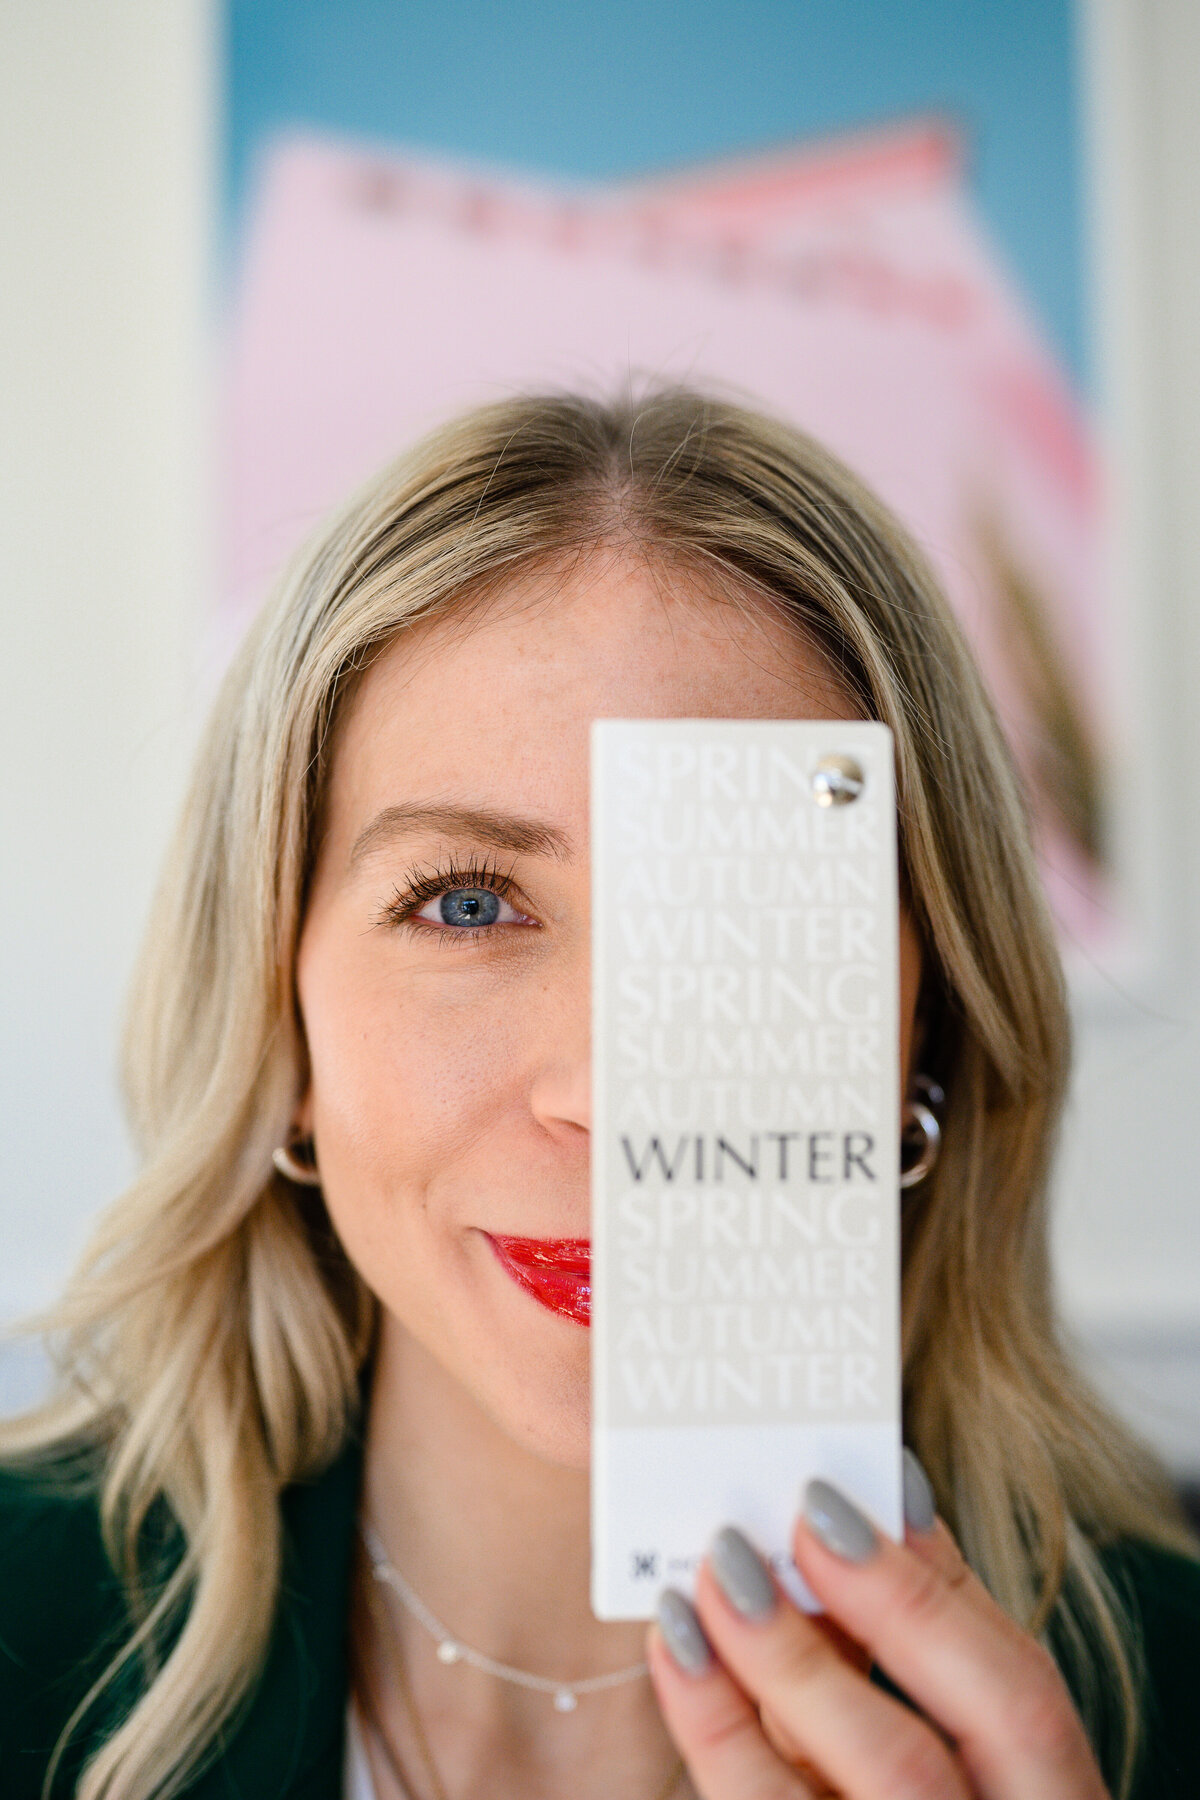 a personal brand photo of a close up of a woman with bright blue eyes and shiny red lipstick holding a card that says winter in front of one eye